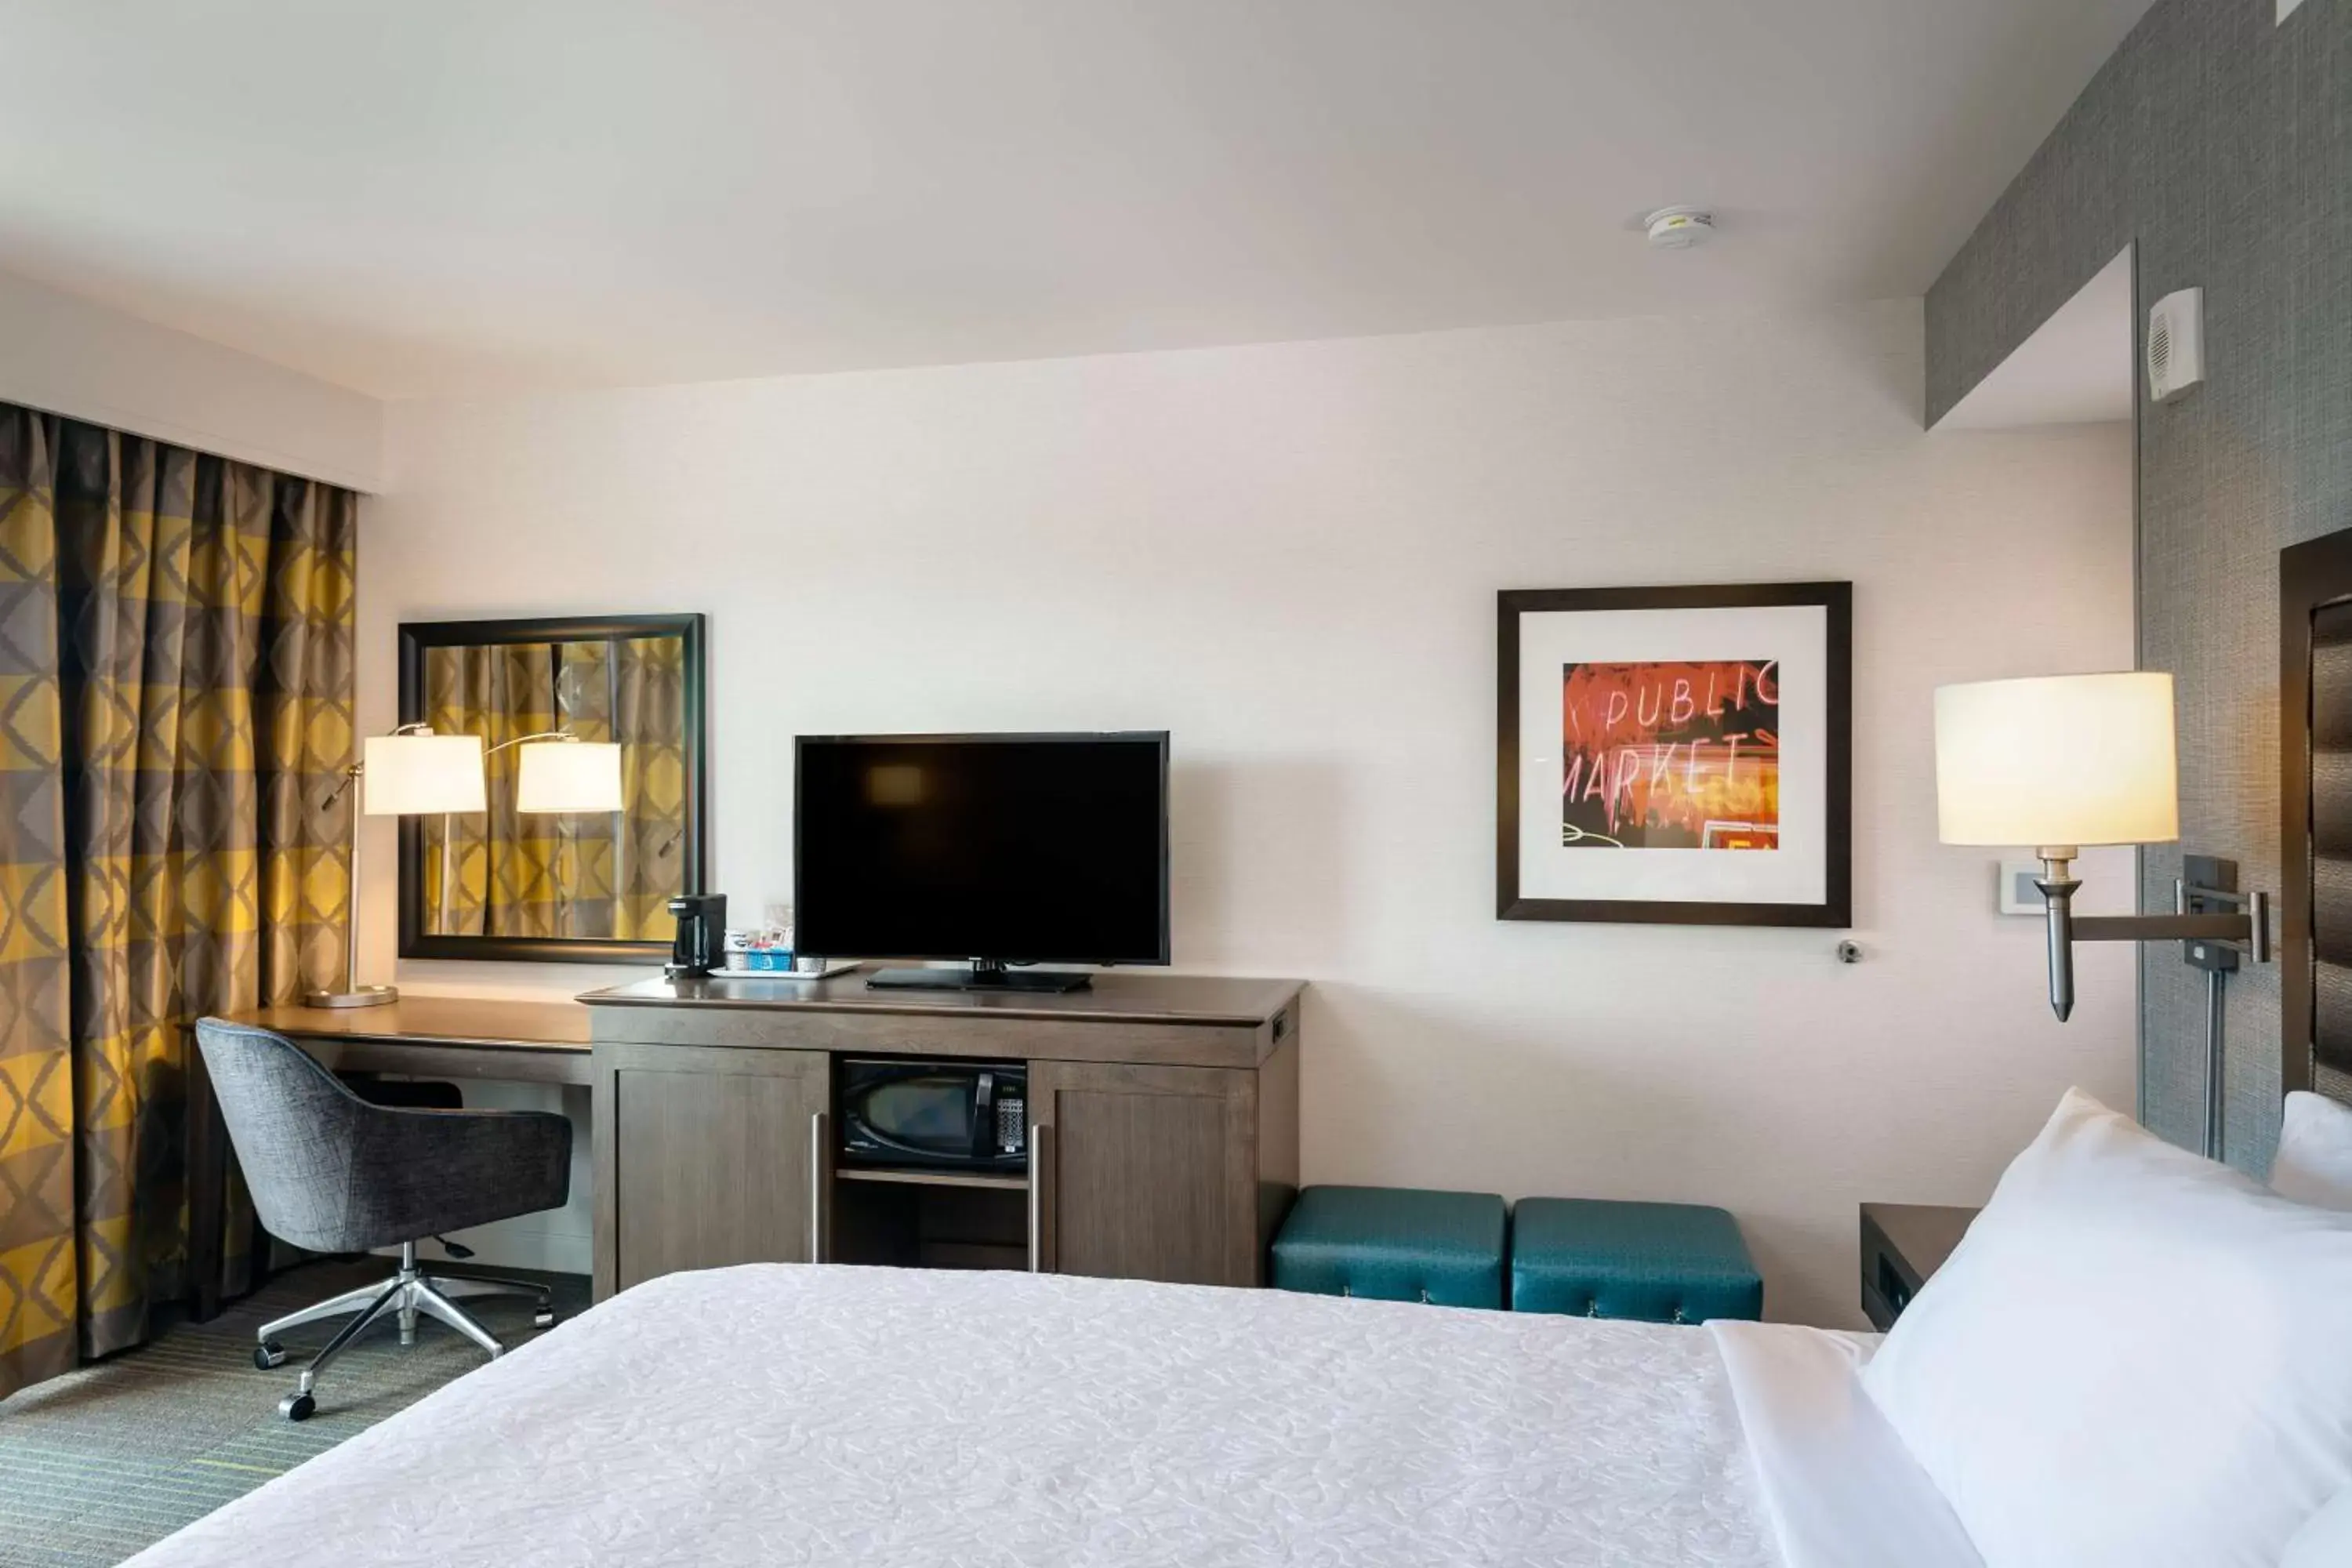 Bed in Hampton Inn & Suites by Hilton Seattle/Northgate